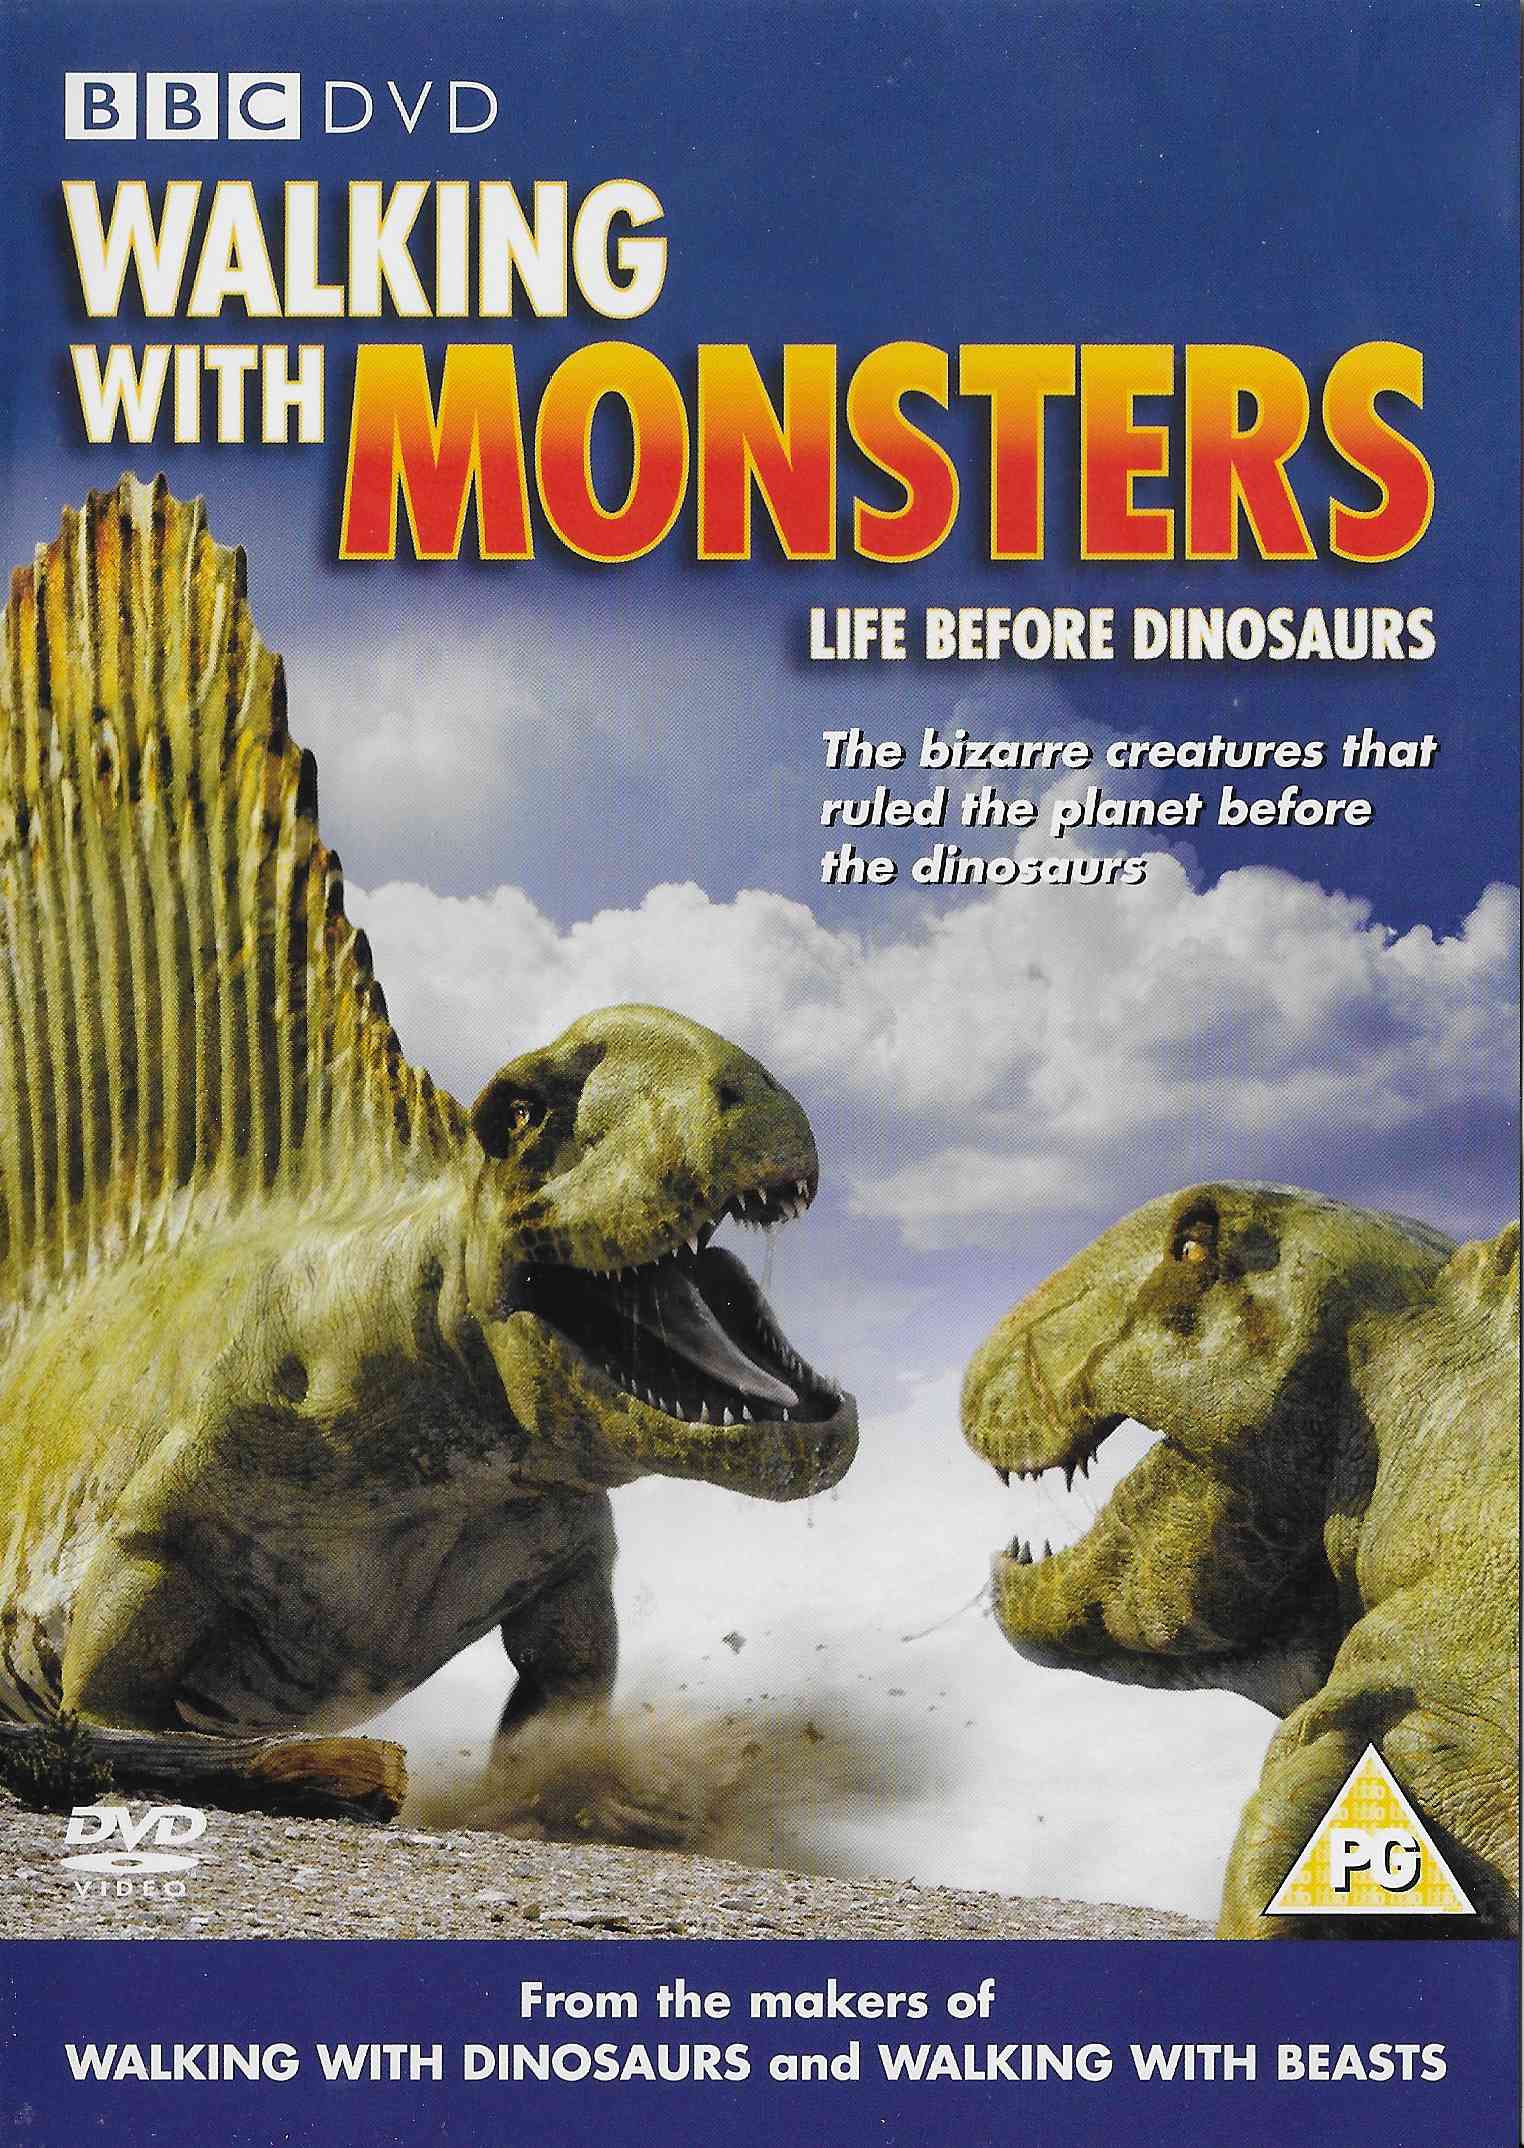 Picture of BBCDVD 1750 Walking with monsters by artist Unknown from the BBC records and Tapes library